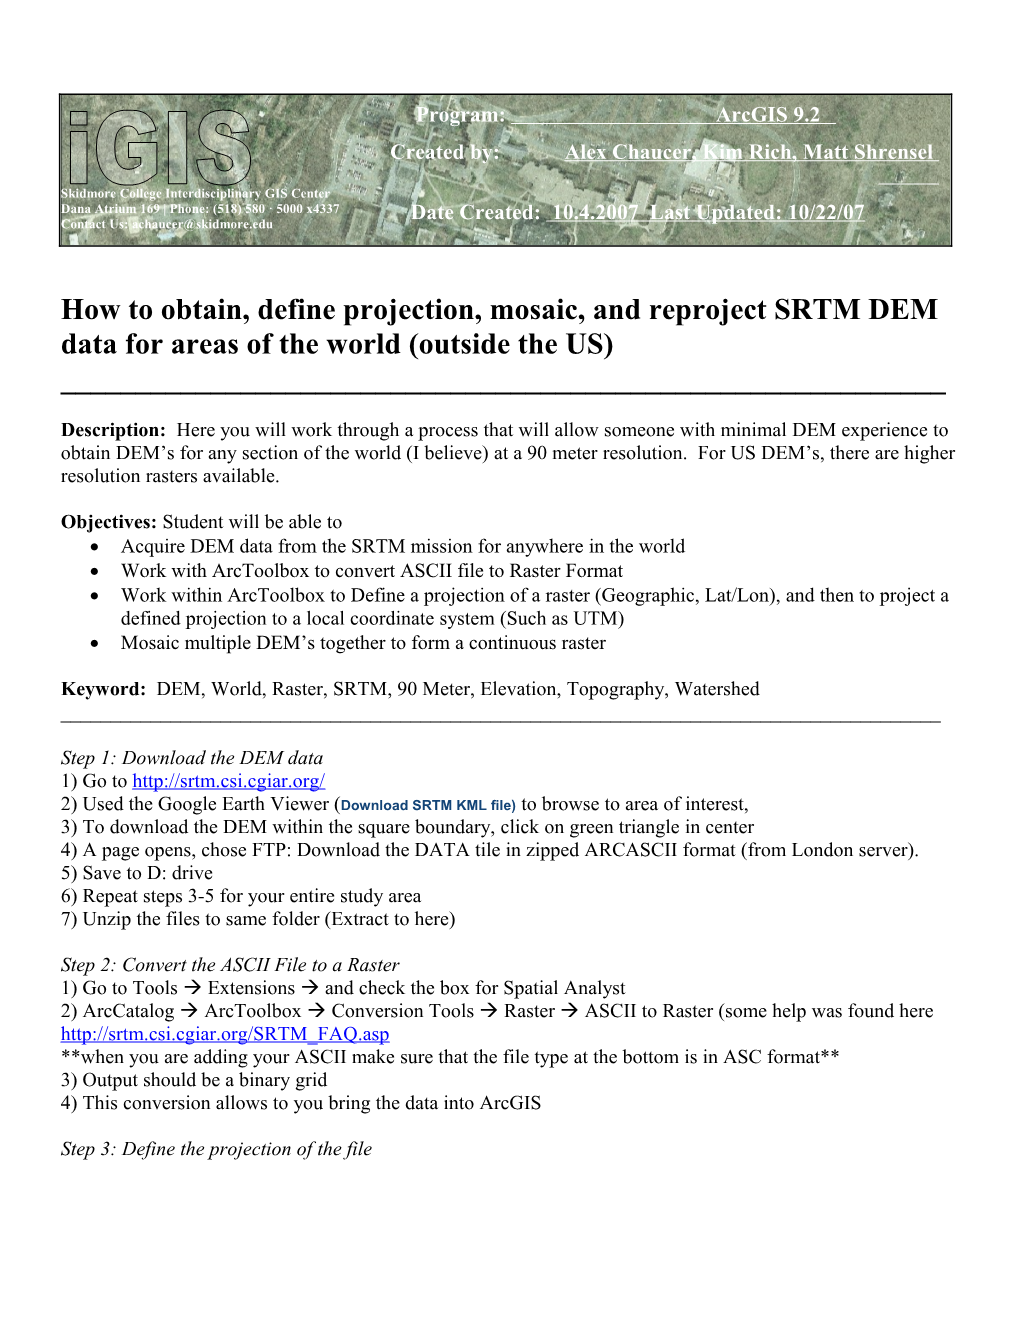 How to Obtain, Define Projection, Mosaic, and Reproject SRTM DEM Data for Areas of The